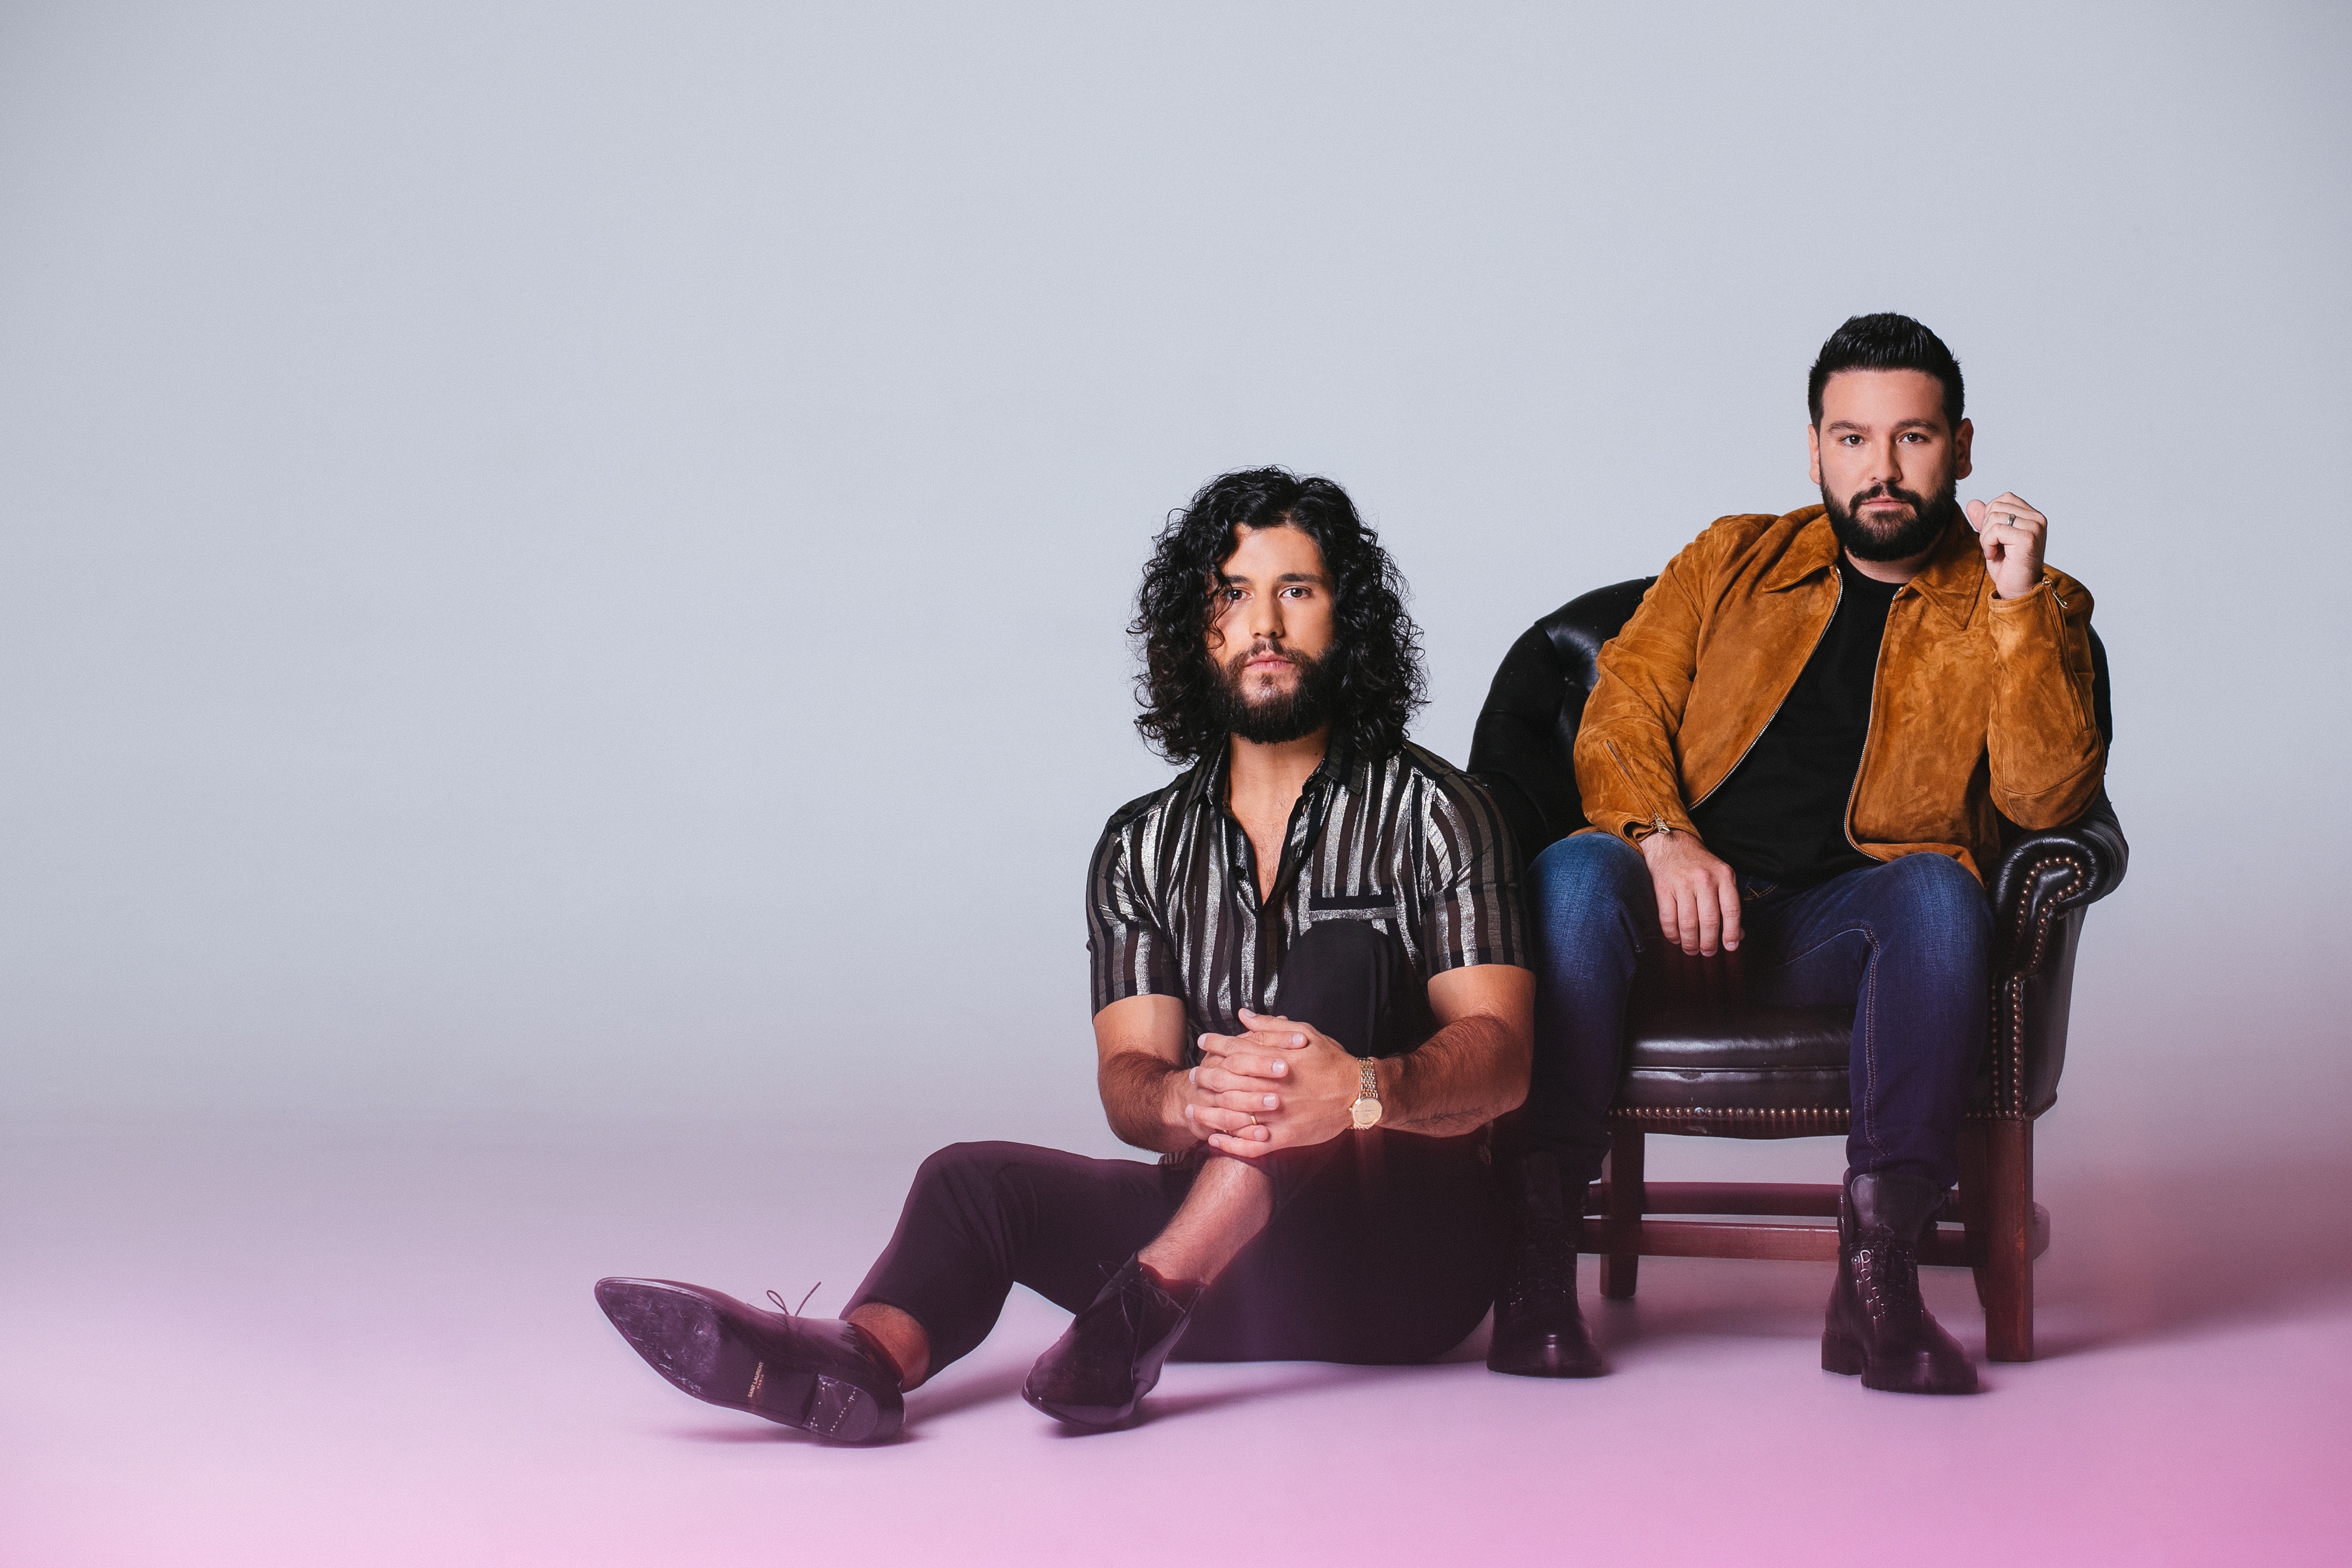 DAN + SHAY NOMINATED FOR 2020 CMA INTERNATIONAL AWARDS AS “10,000 HOURS” TOPS 600 MILLION GLOBAL STREAMS